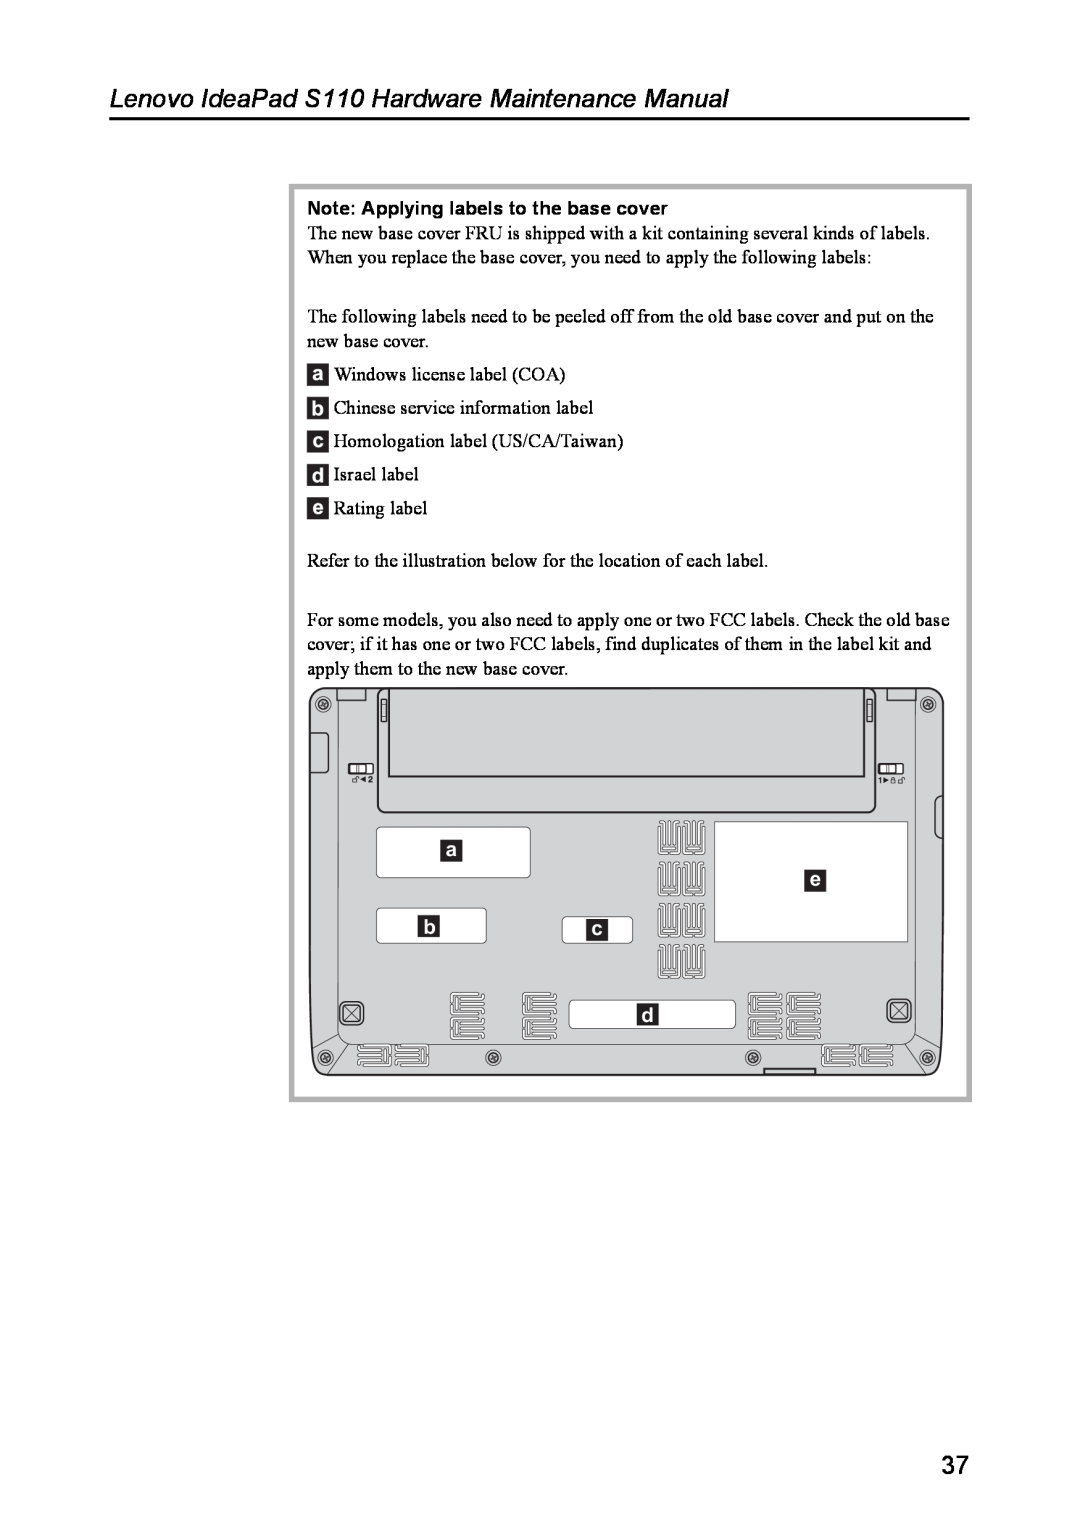 Lenovo manual Note Applying labels to the base cover, Lenovo IdeaPad S110 Hardware Maintenance Manual, a bc d 